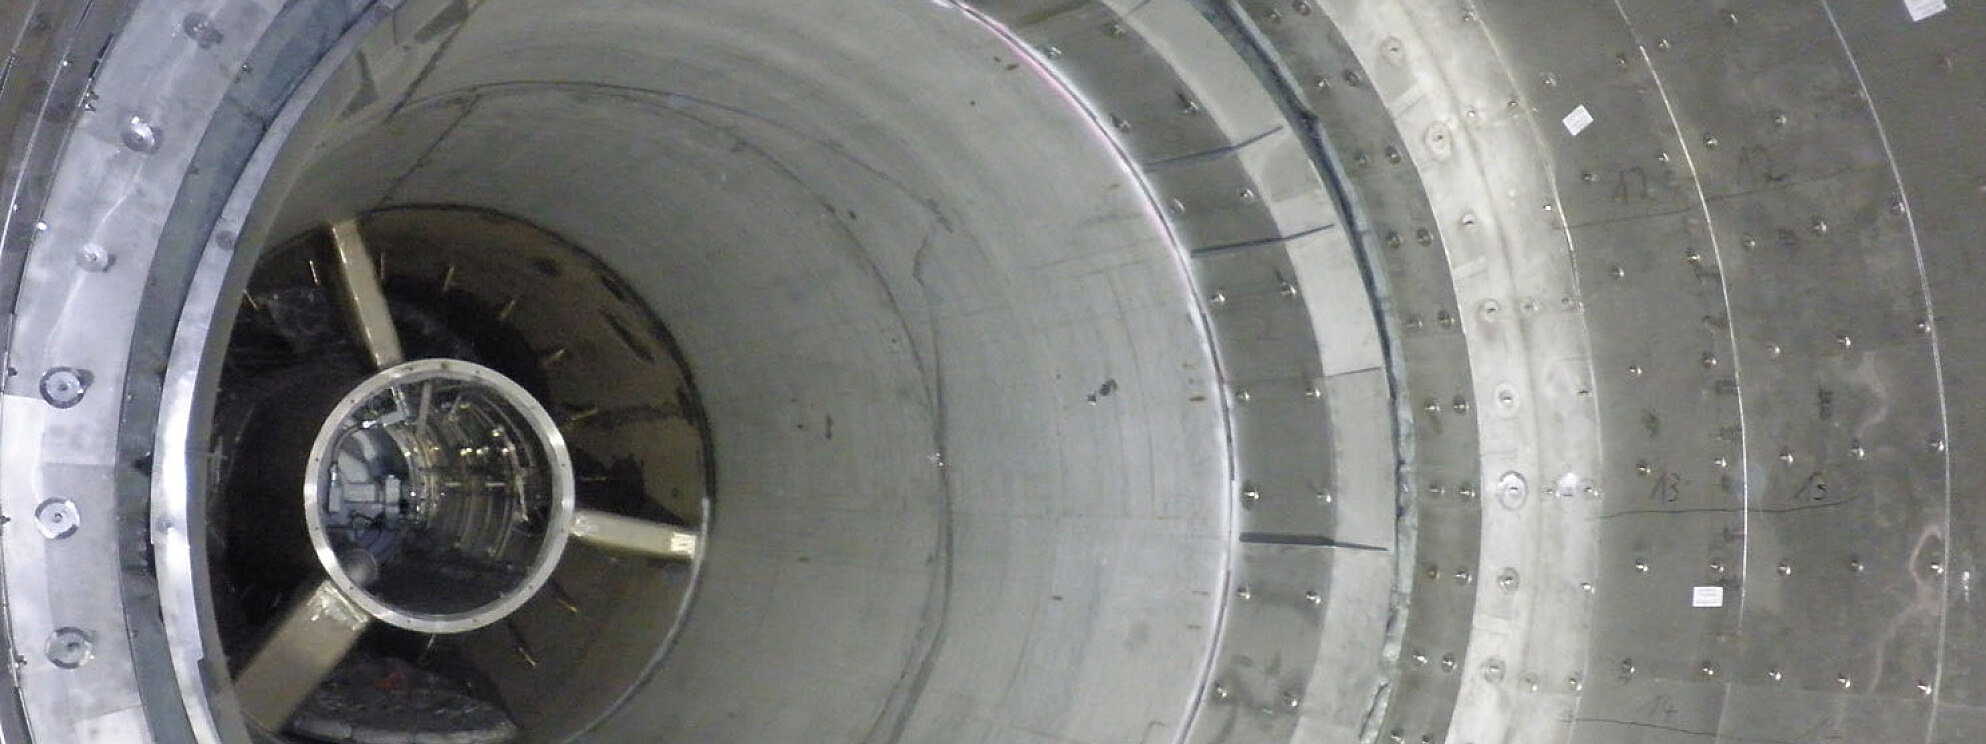 Frenzelit non-metallic expansion joint at exhaust system at turbine outlet